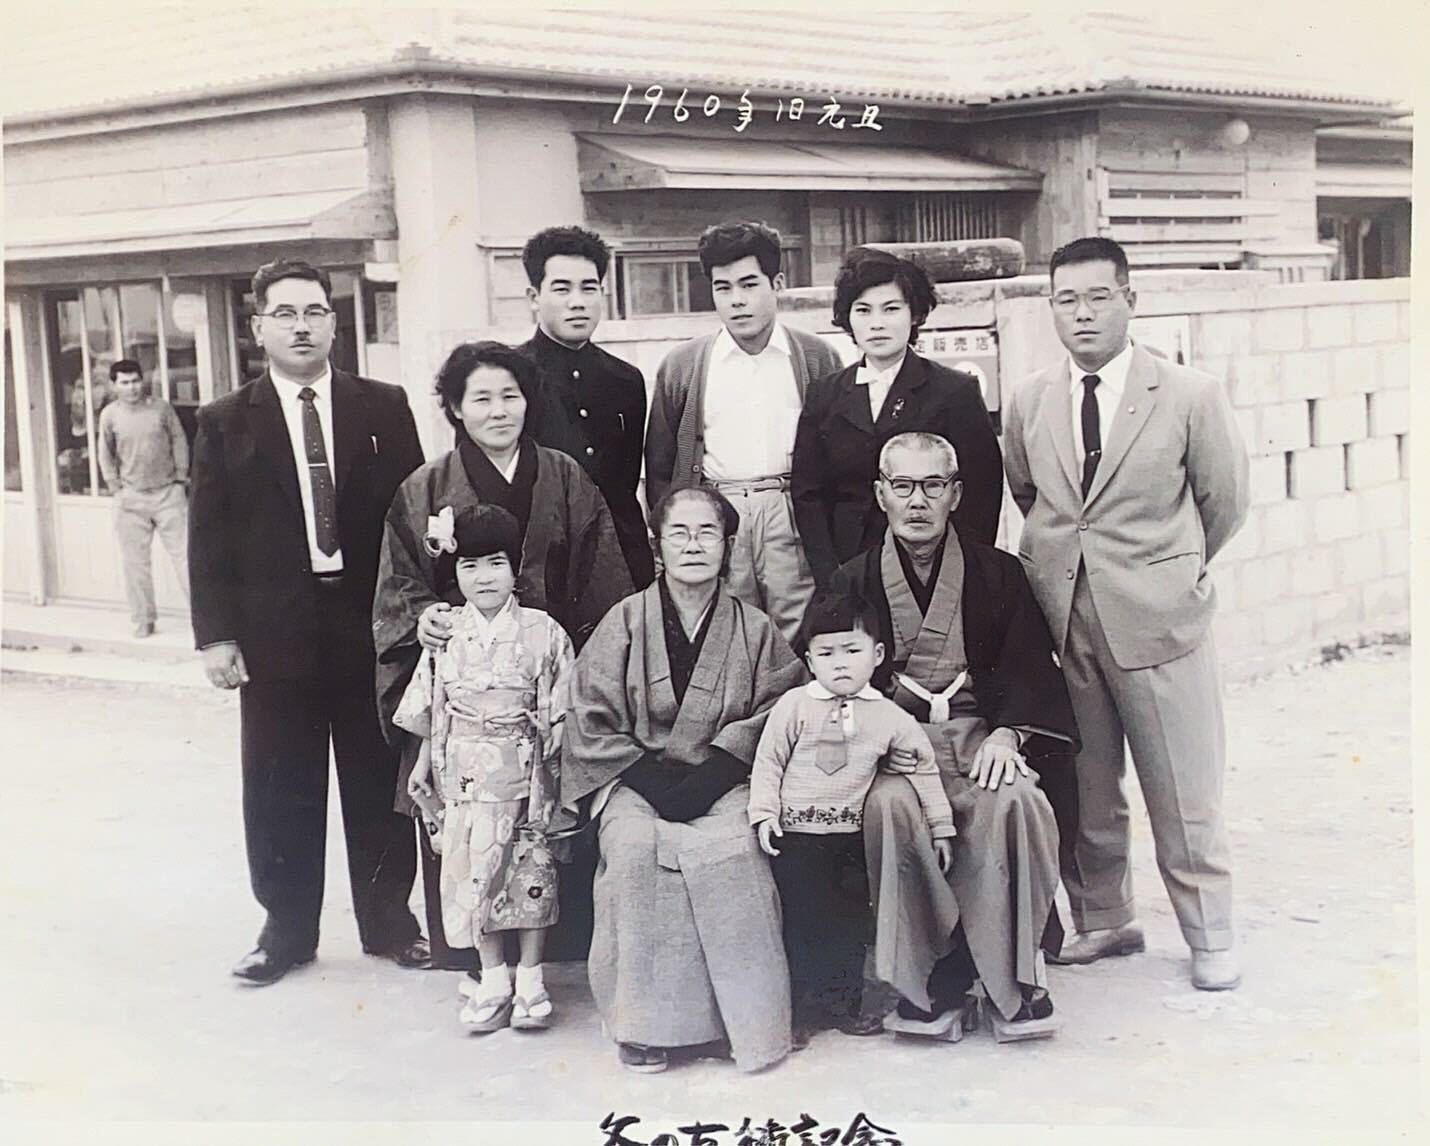 Kiyuna (second from the left) with her family in 1960, at the age of 48. (Source: Courtesy of the family)